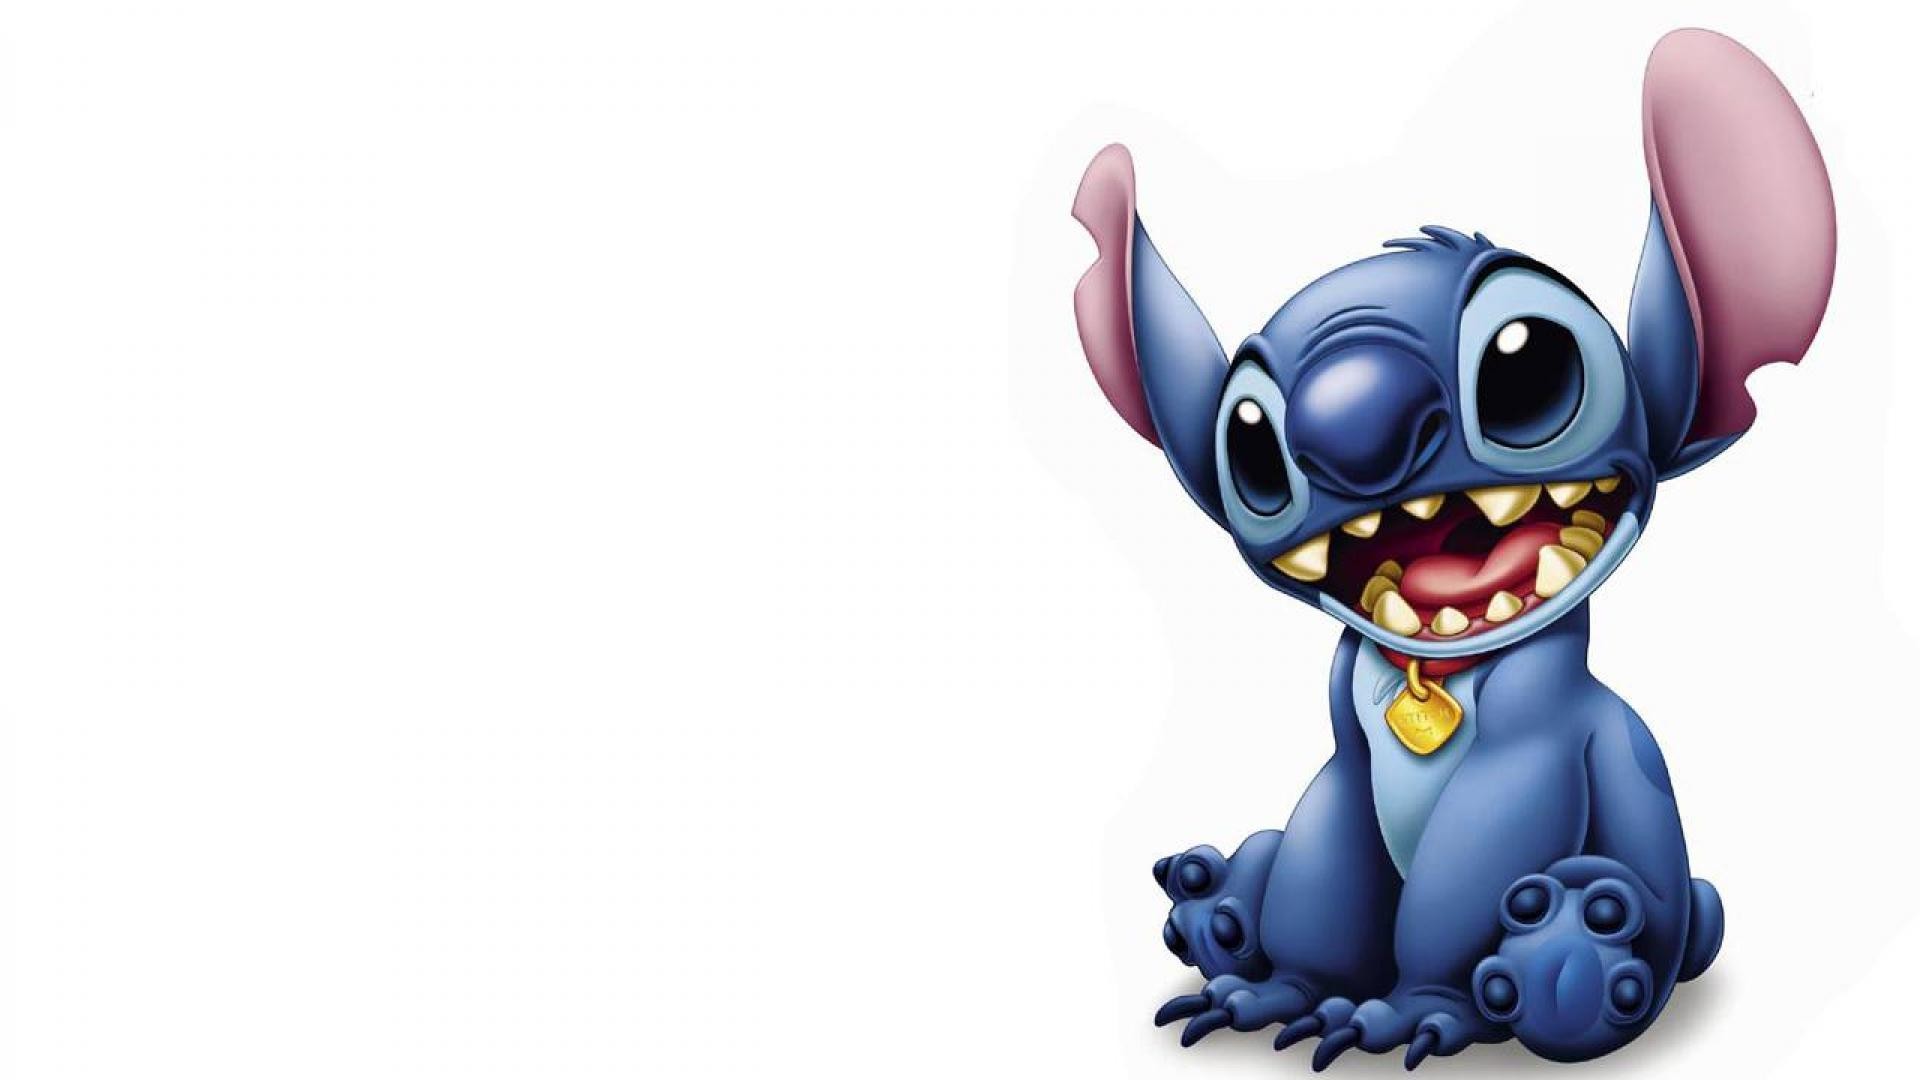  Stitch  wallpaper    Download  free cool wallpapers  for 